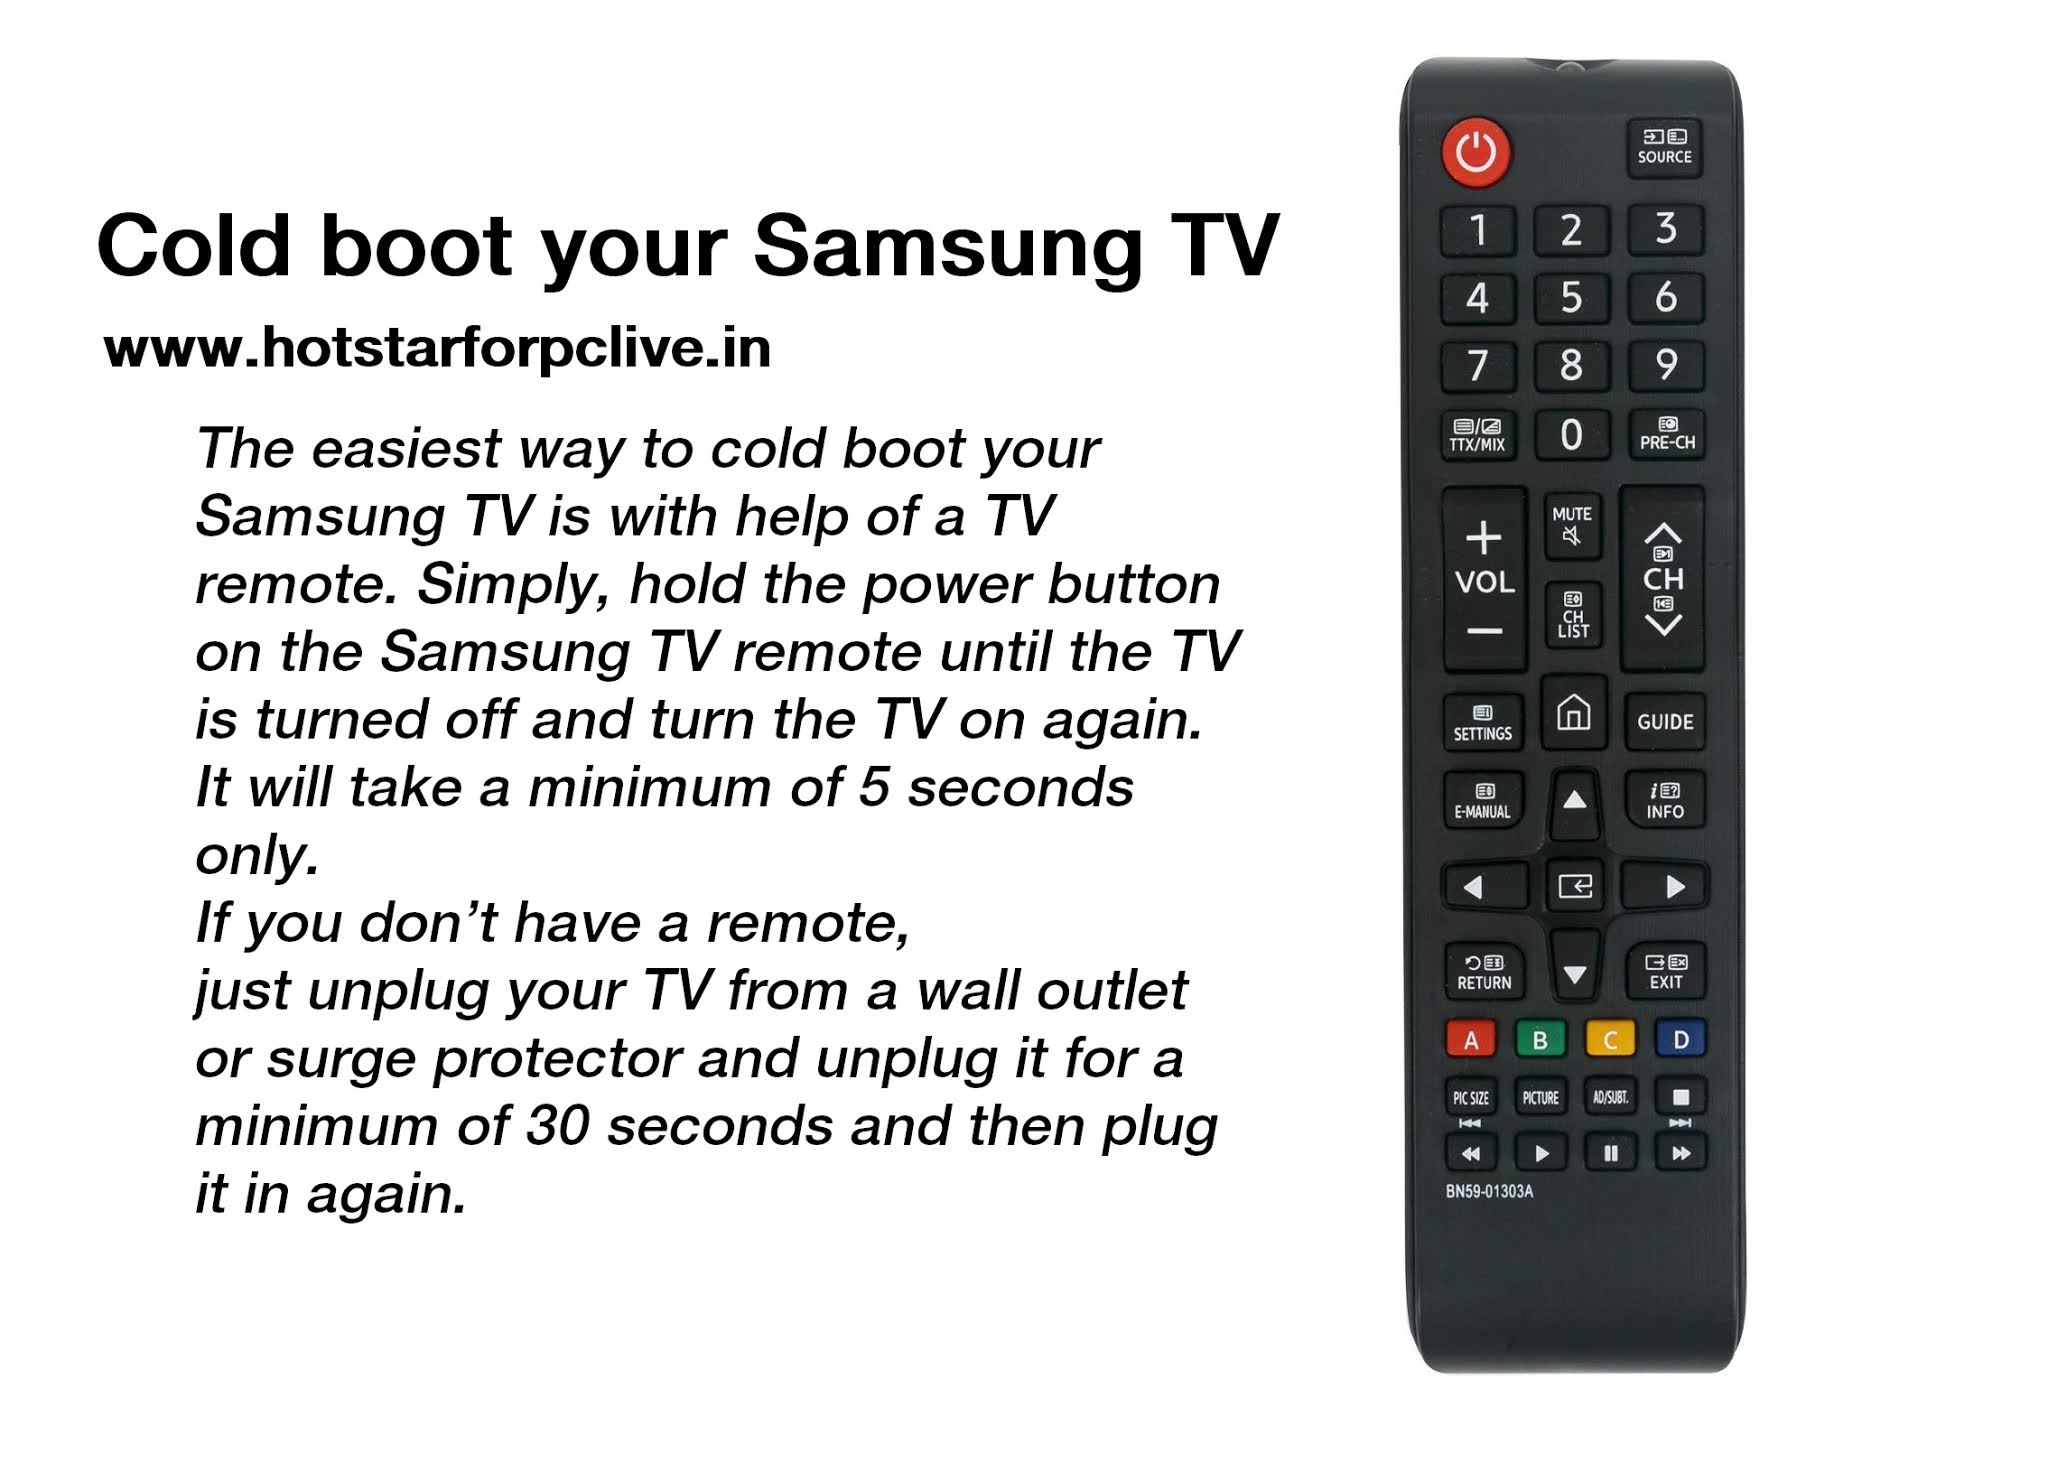 Perform a Cold Boot on Your Samsung TV